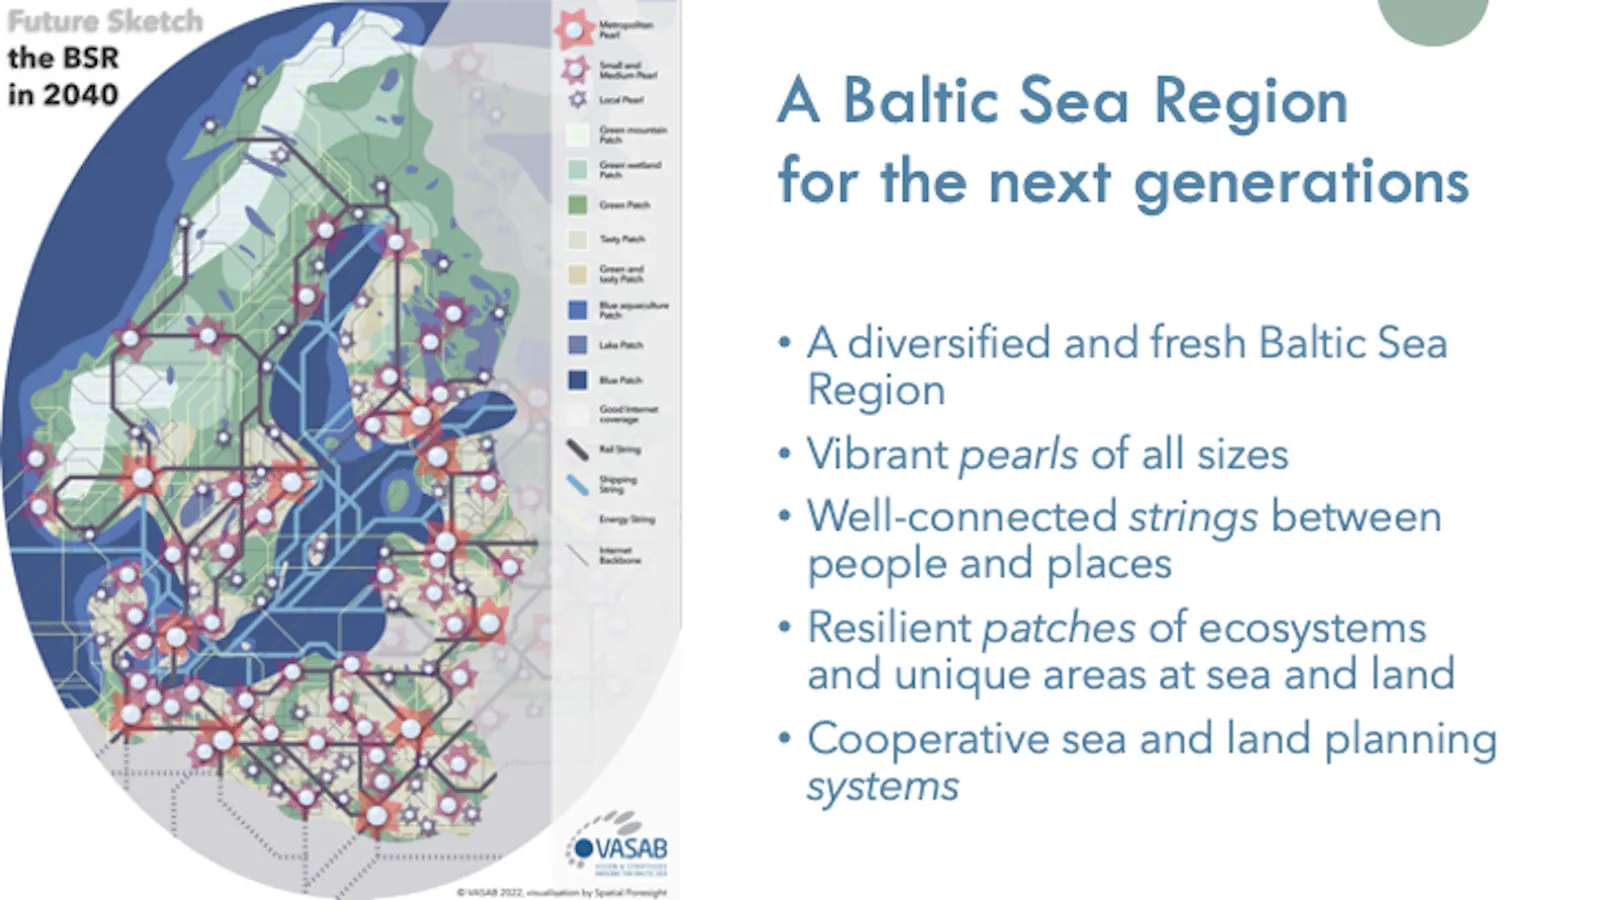 A Baltic Sea Region for the next generations